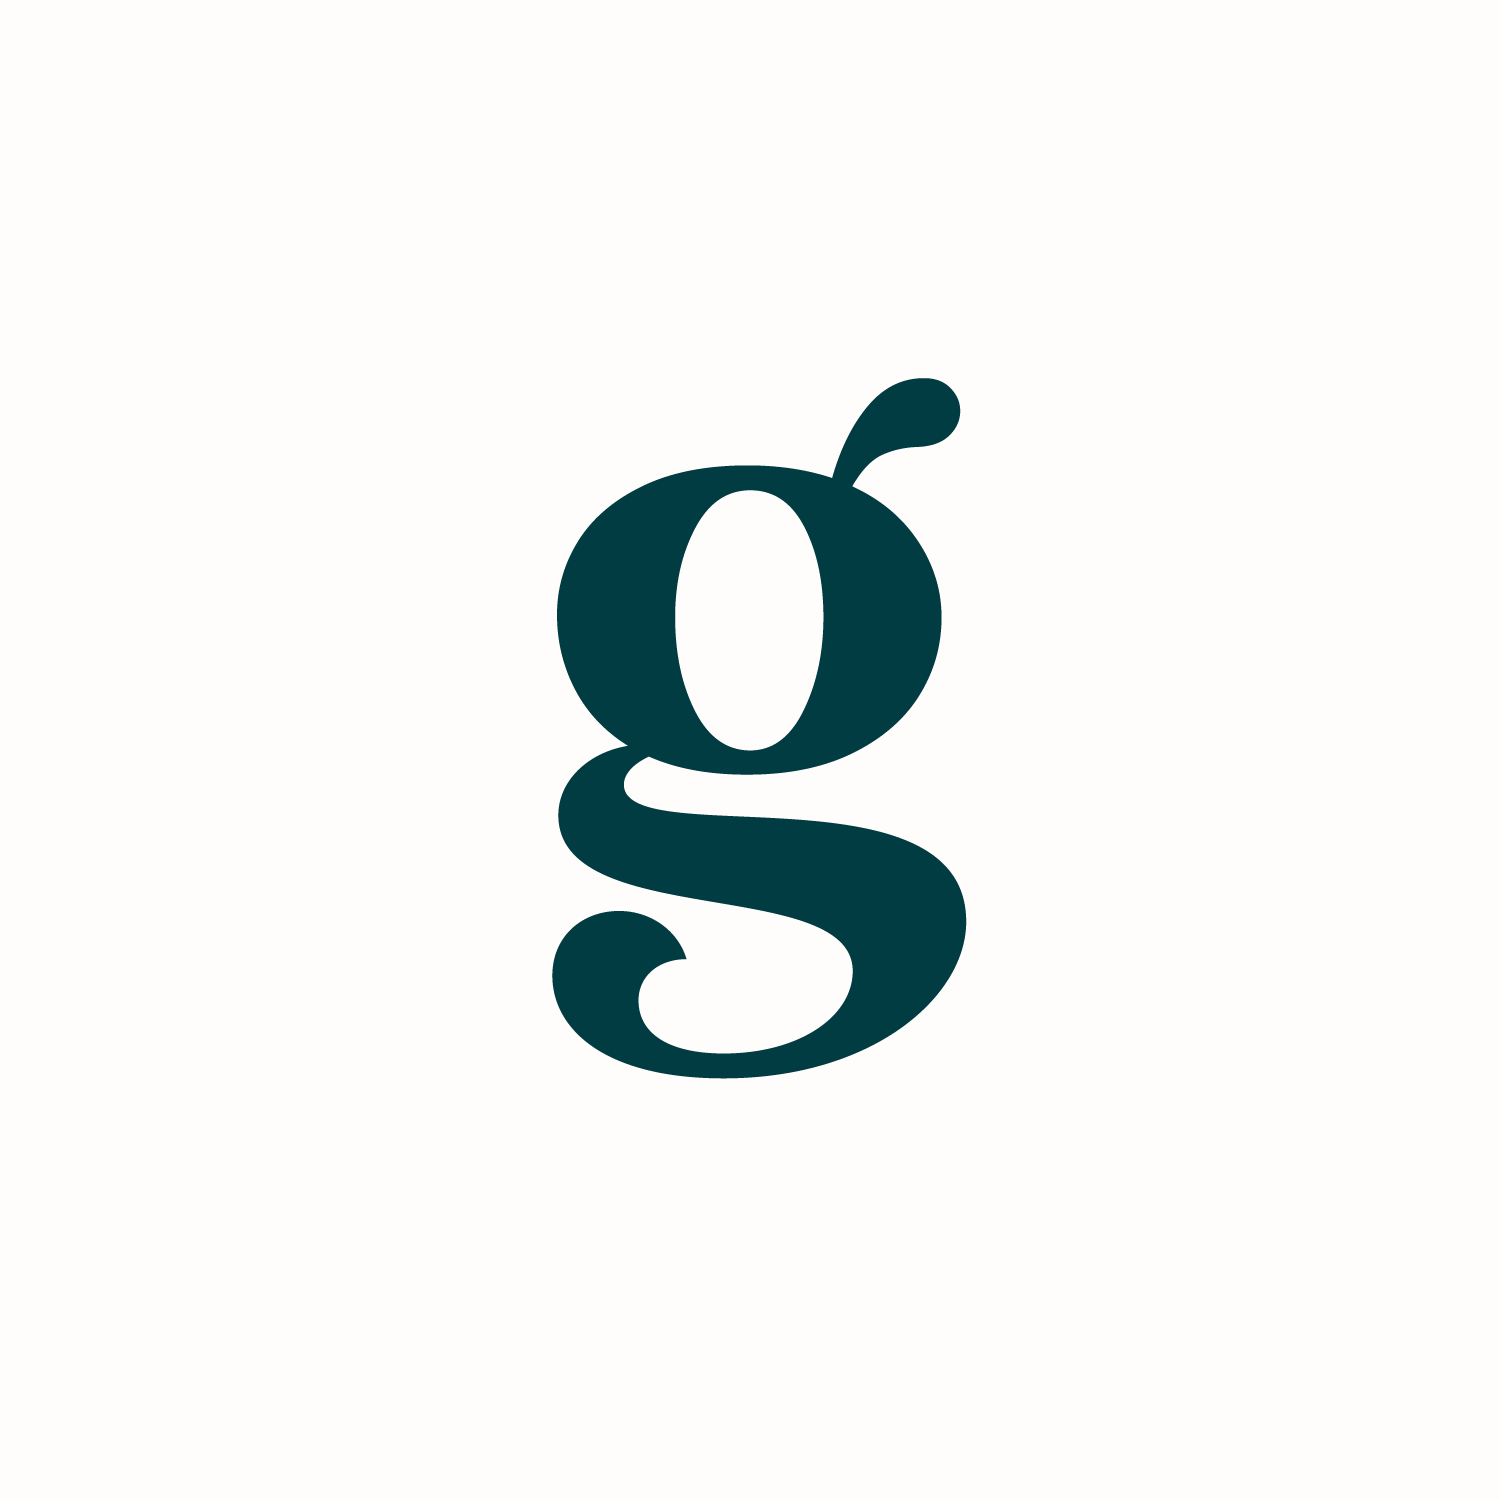 Teal 'g' monogram on a white background for Grazy